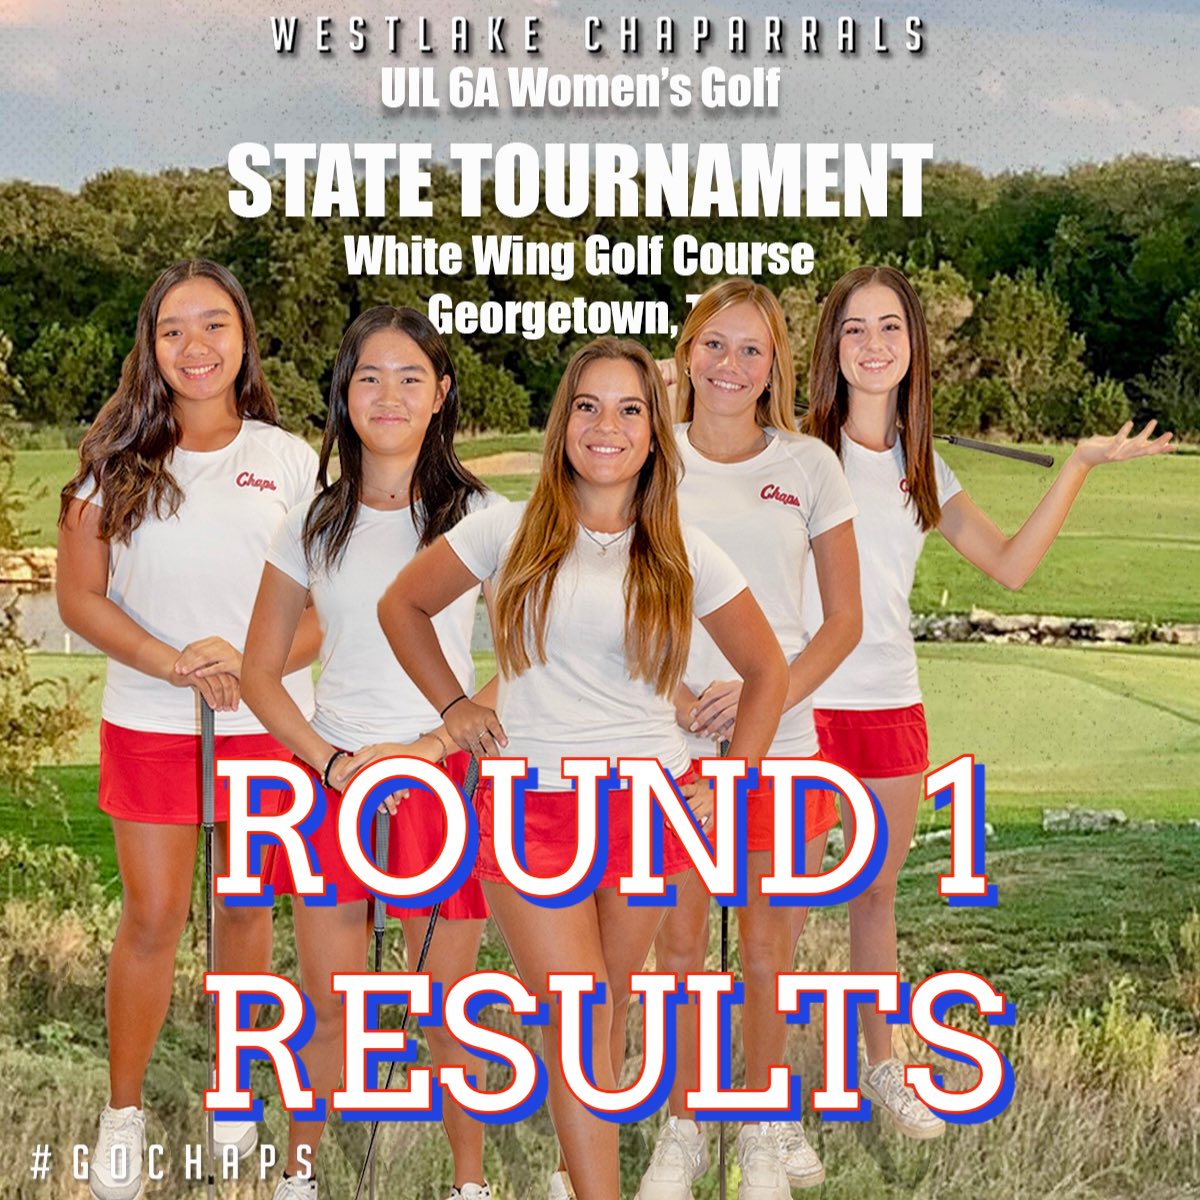 First round results from the 6A Women’s Golf State Tournament are in and the Chaps shot 313 and are in 6th place overall. Isabel Emanuels led the way with a 71 which is one shot off of the individual lead. #GoChaps